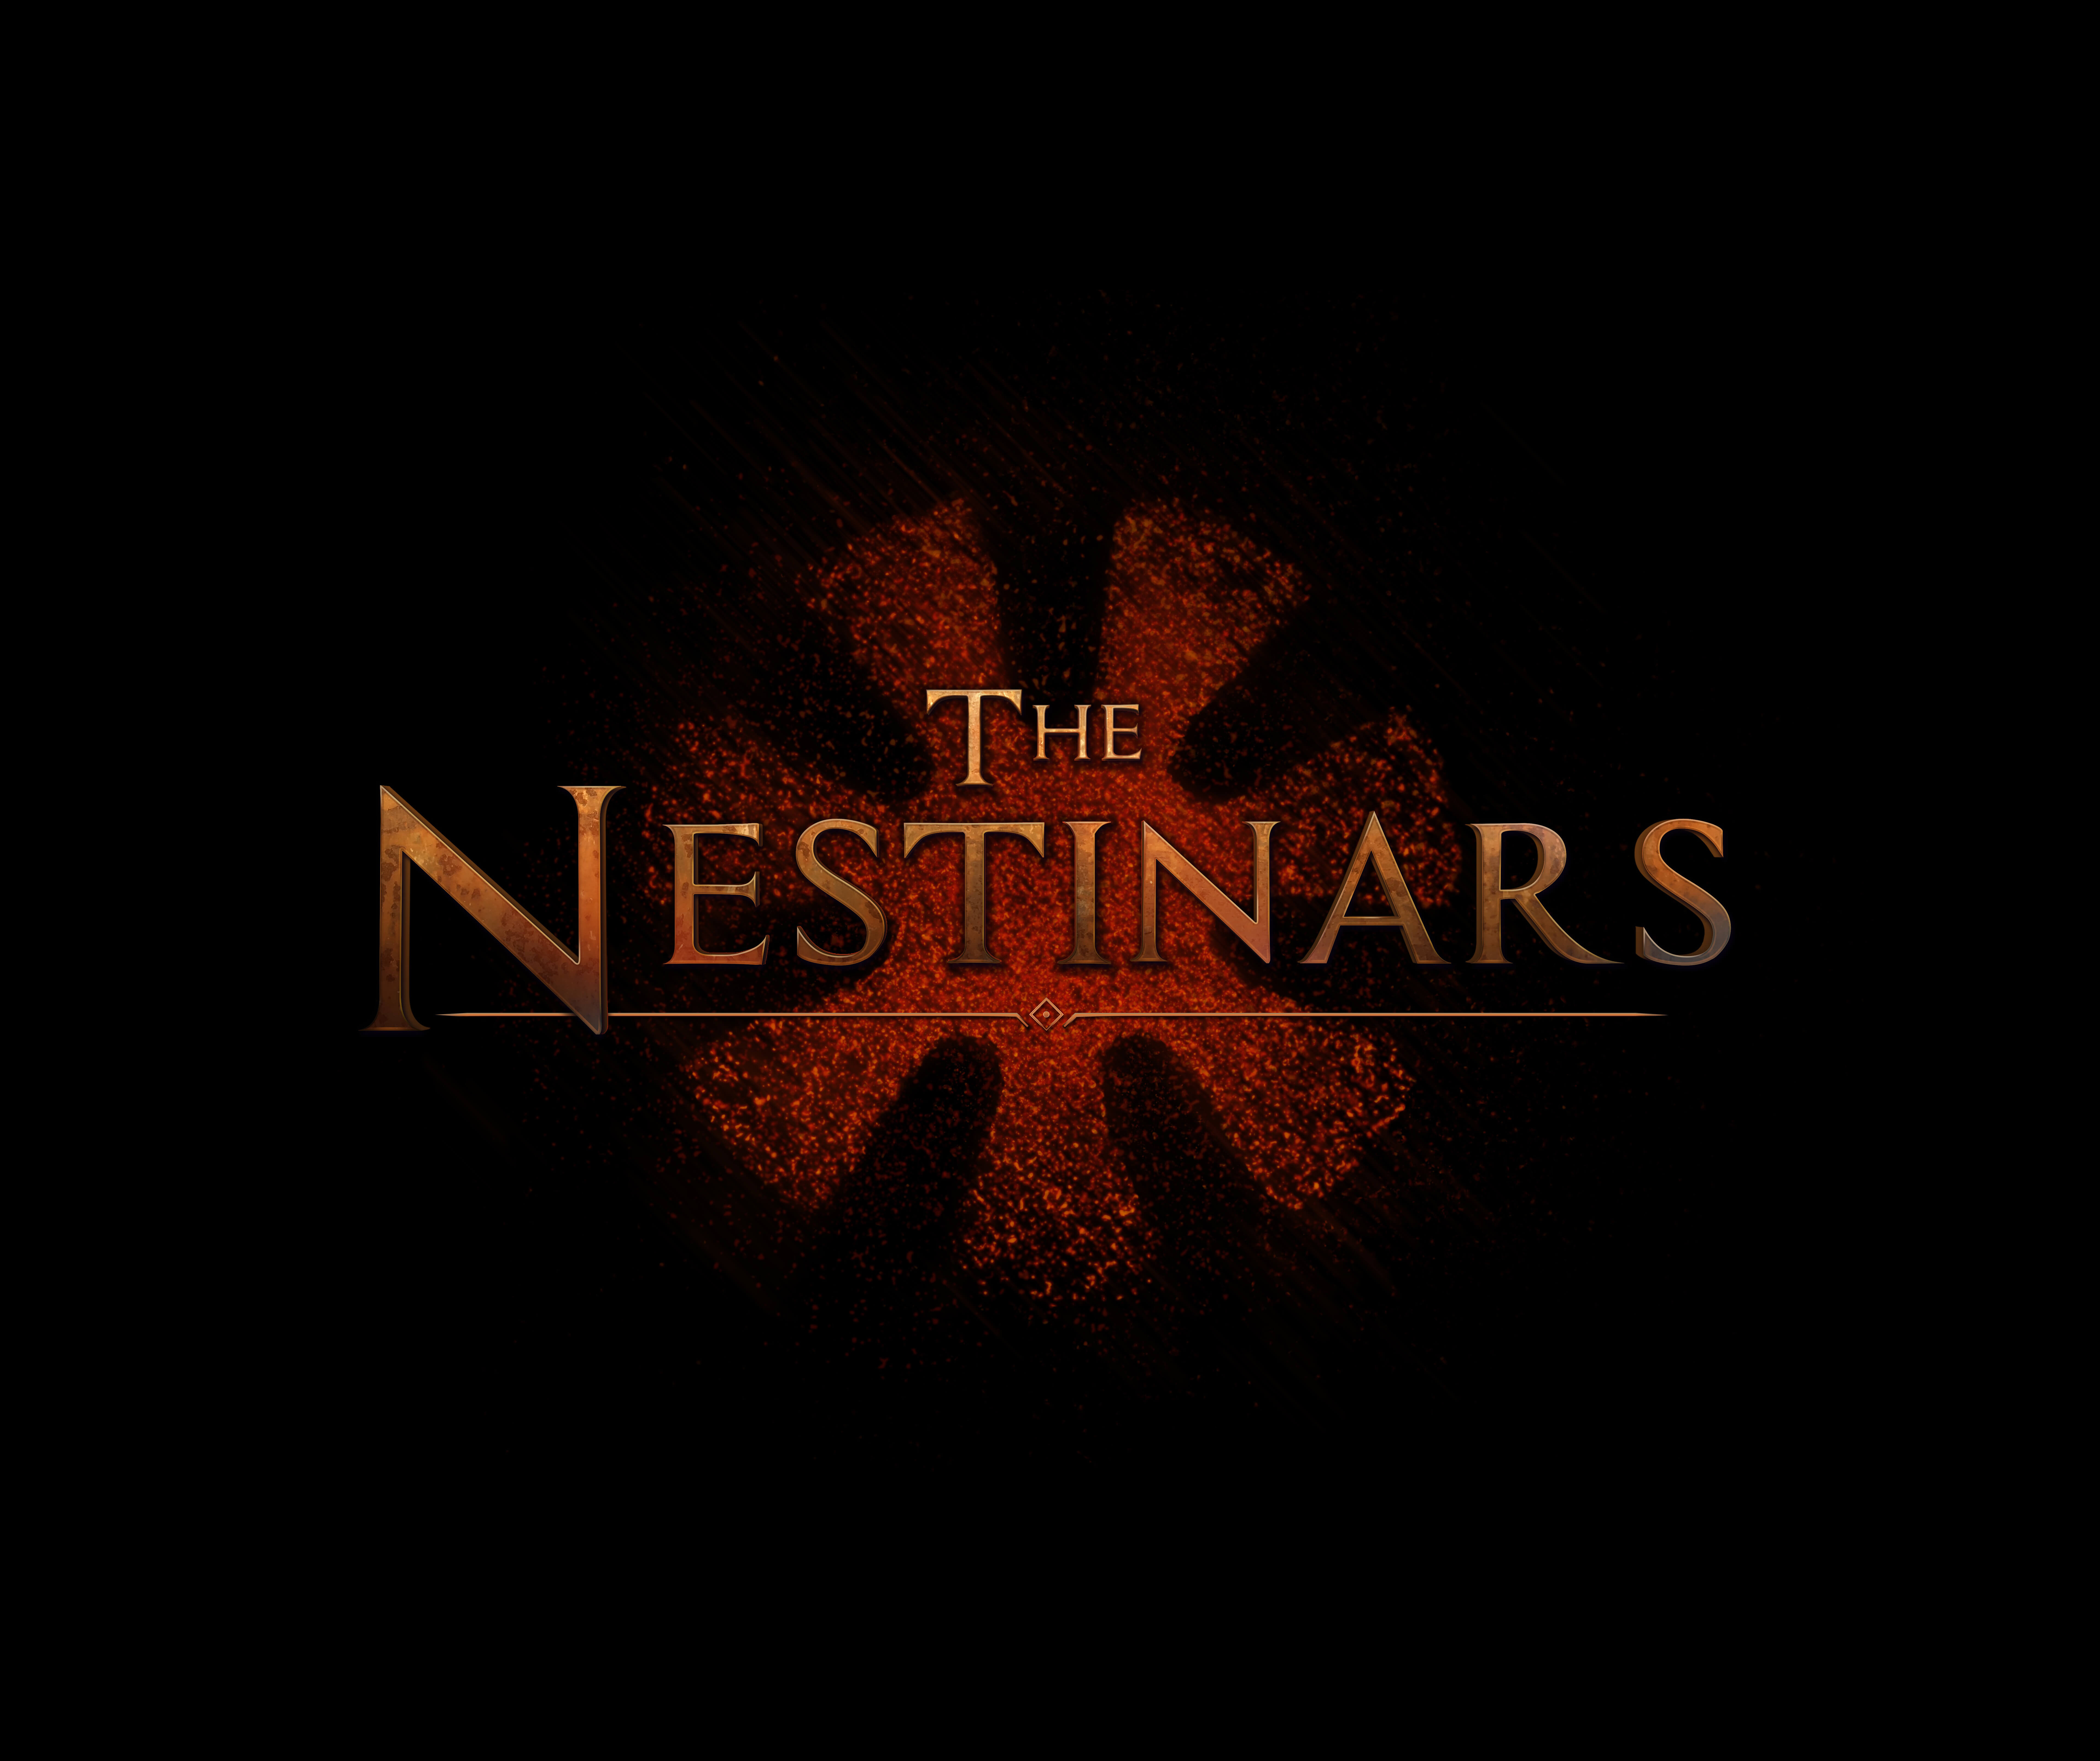 Nestinars logo with text and background